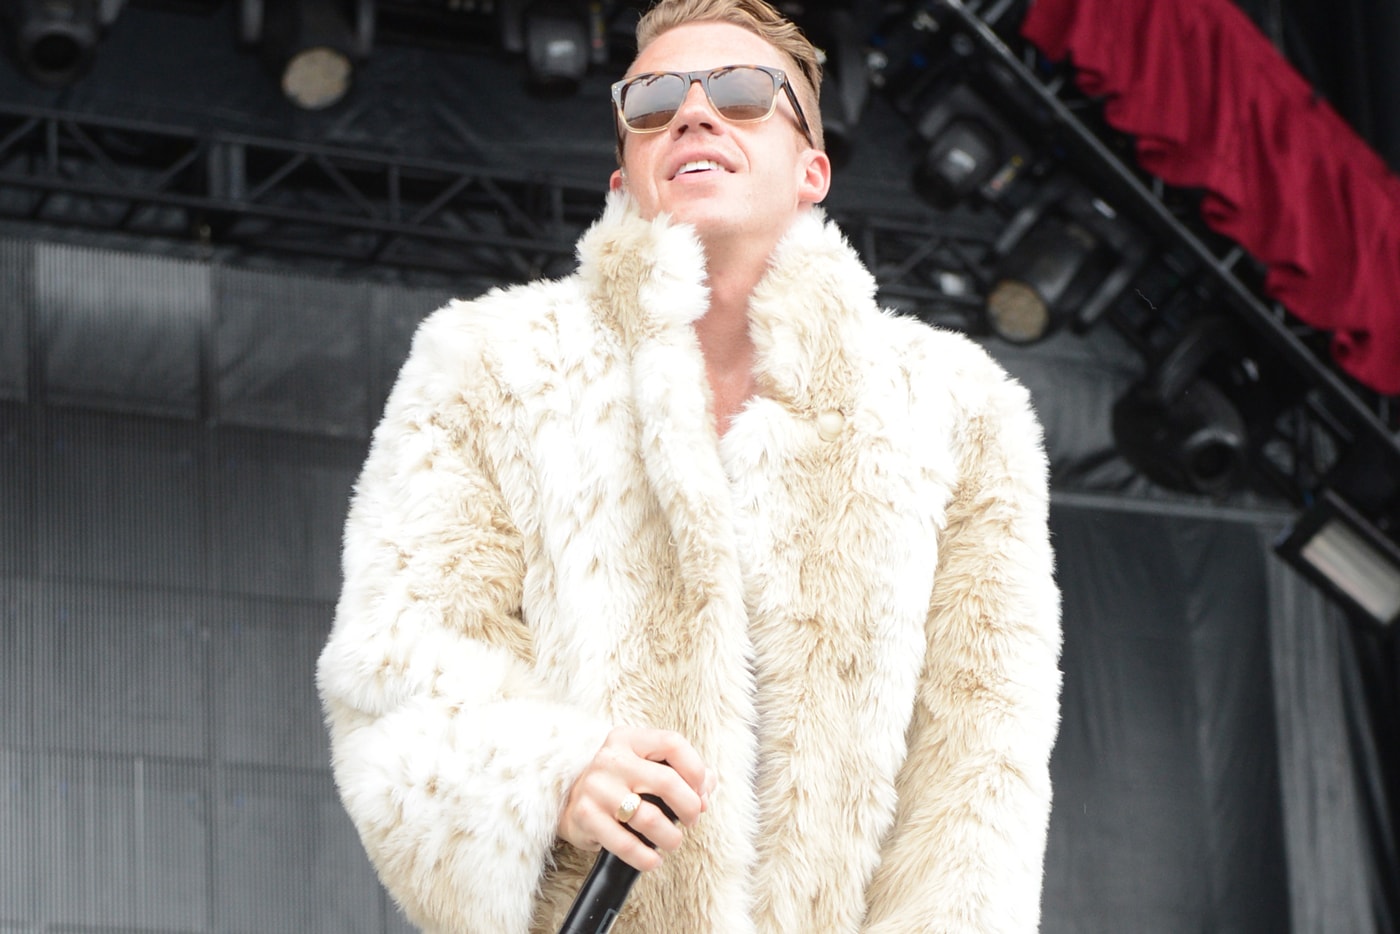 Macklemore & Ryan Lewis x "White Privilege II' x 'The Late Show With Stephen Colbert' 